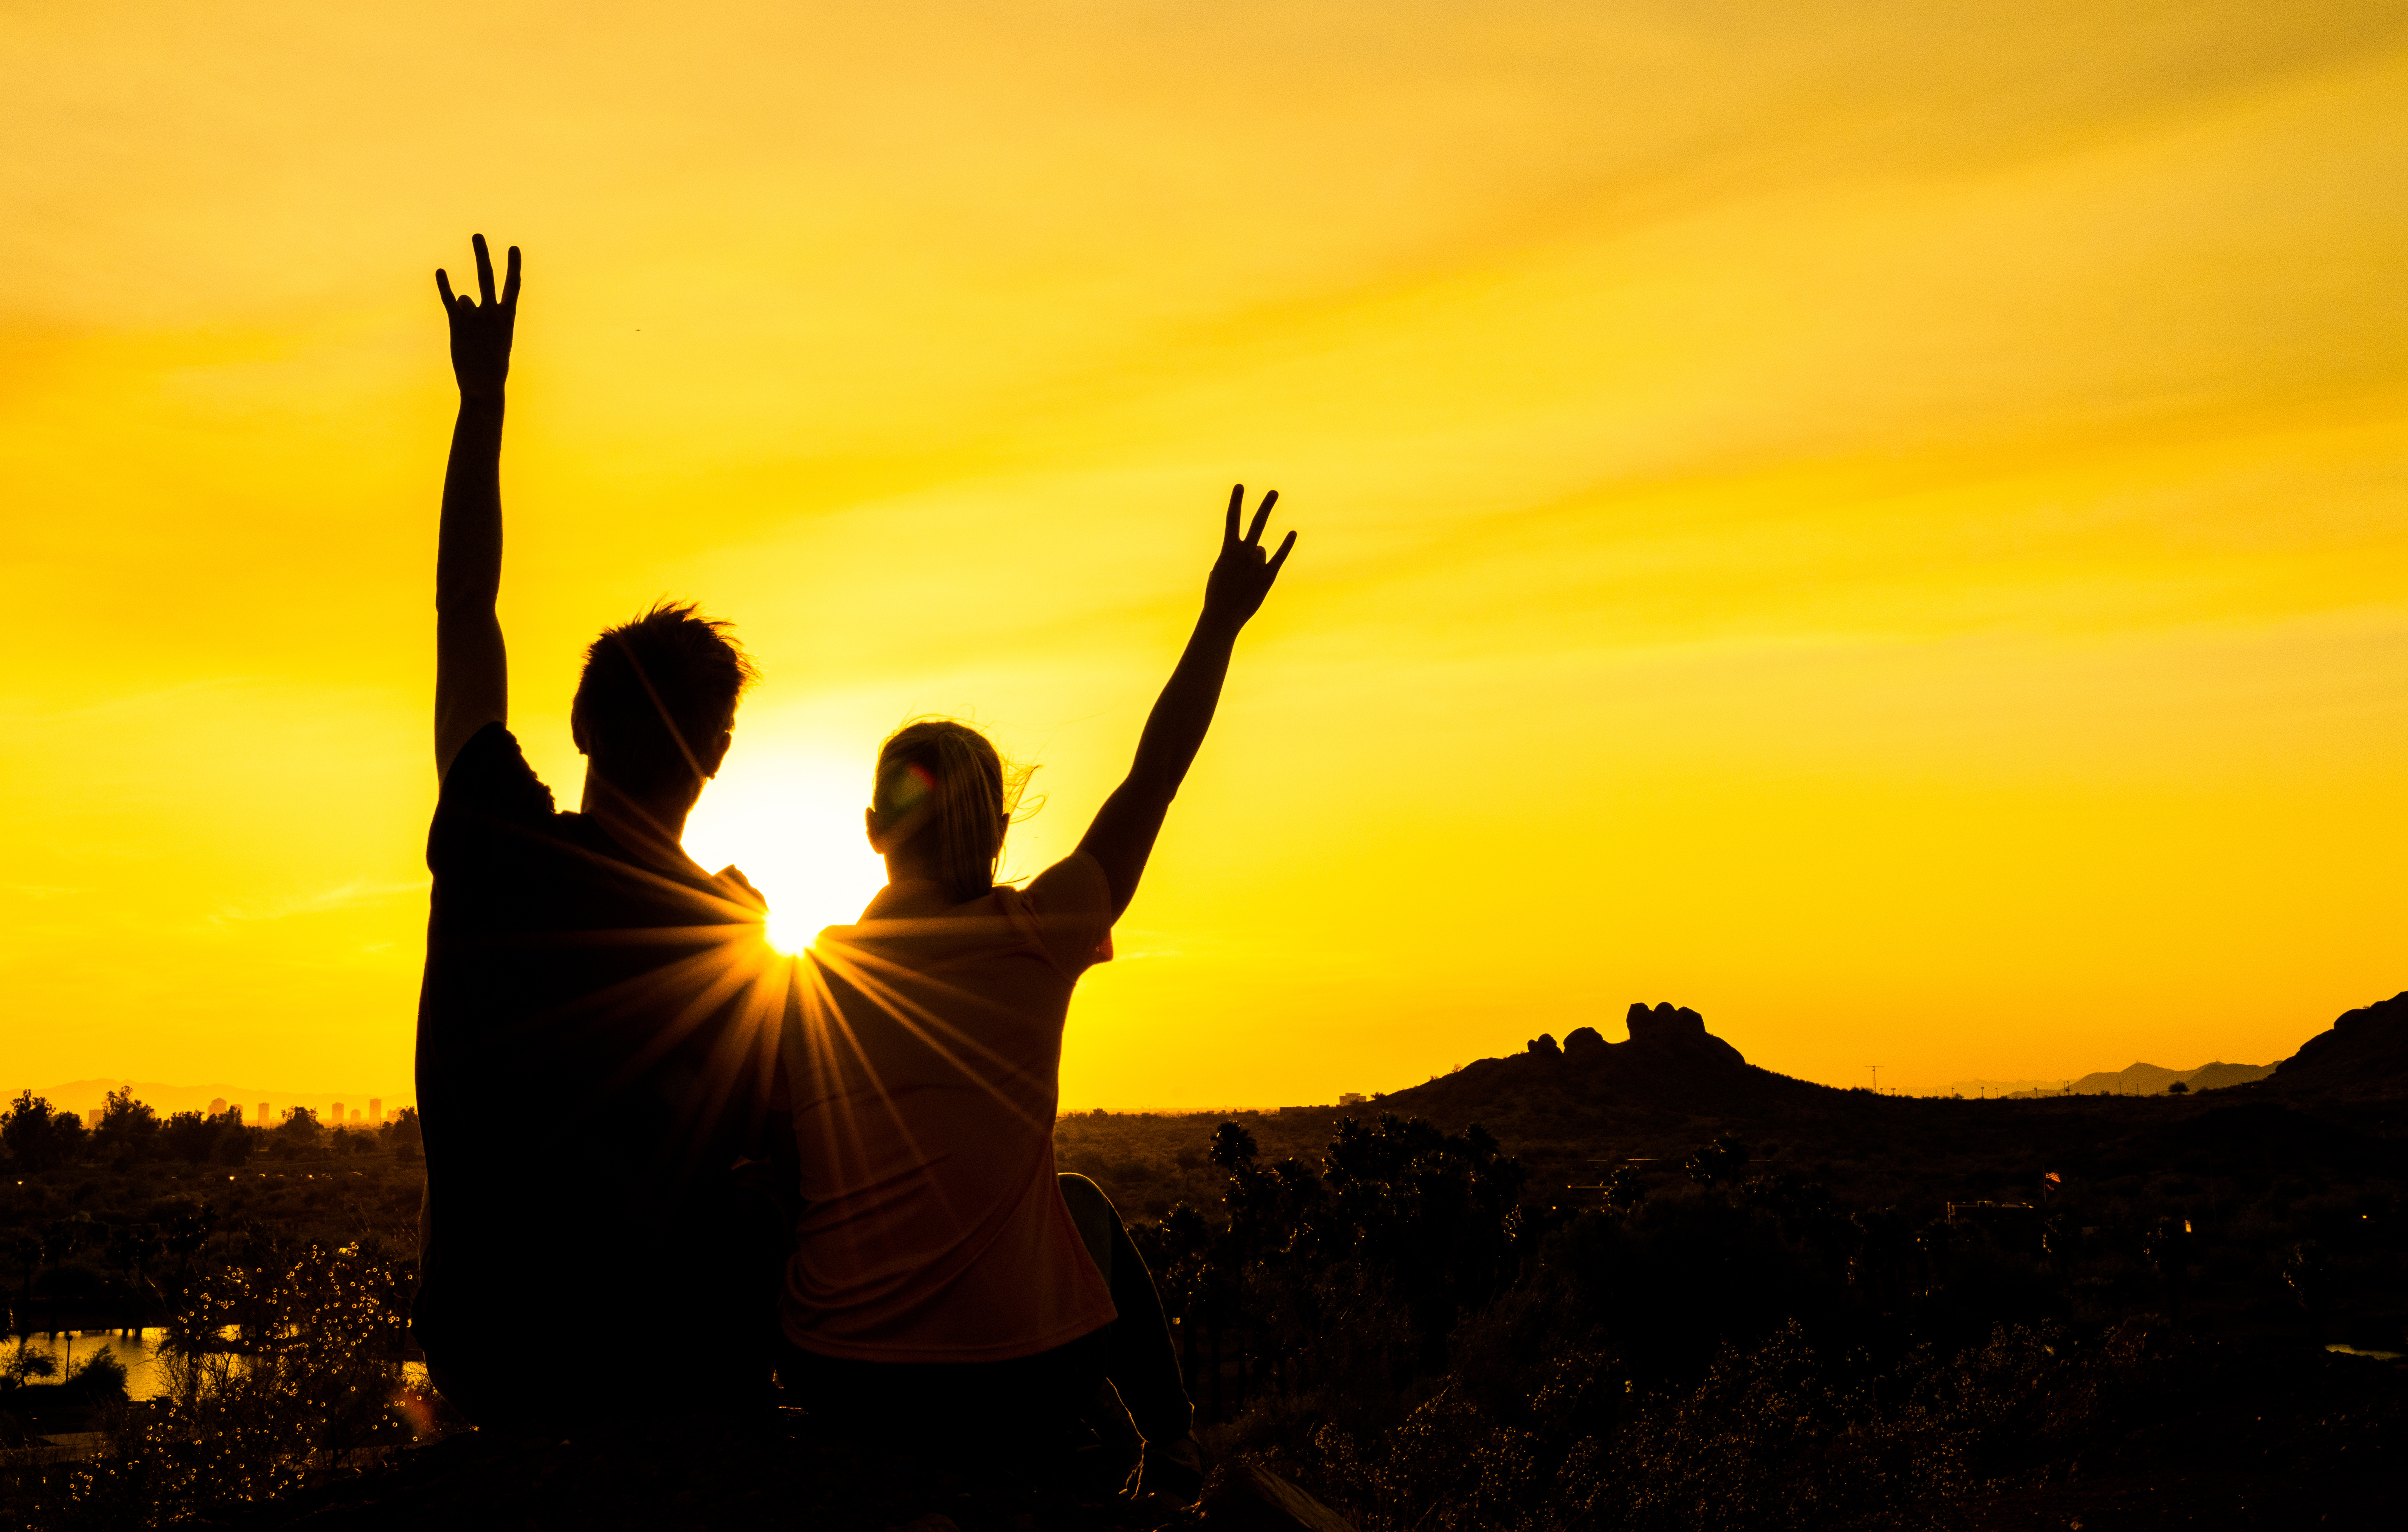 Two Sun Devils silhouetted by a golden sunset raise an arm in celebration.